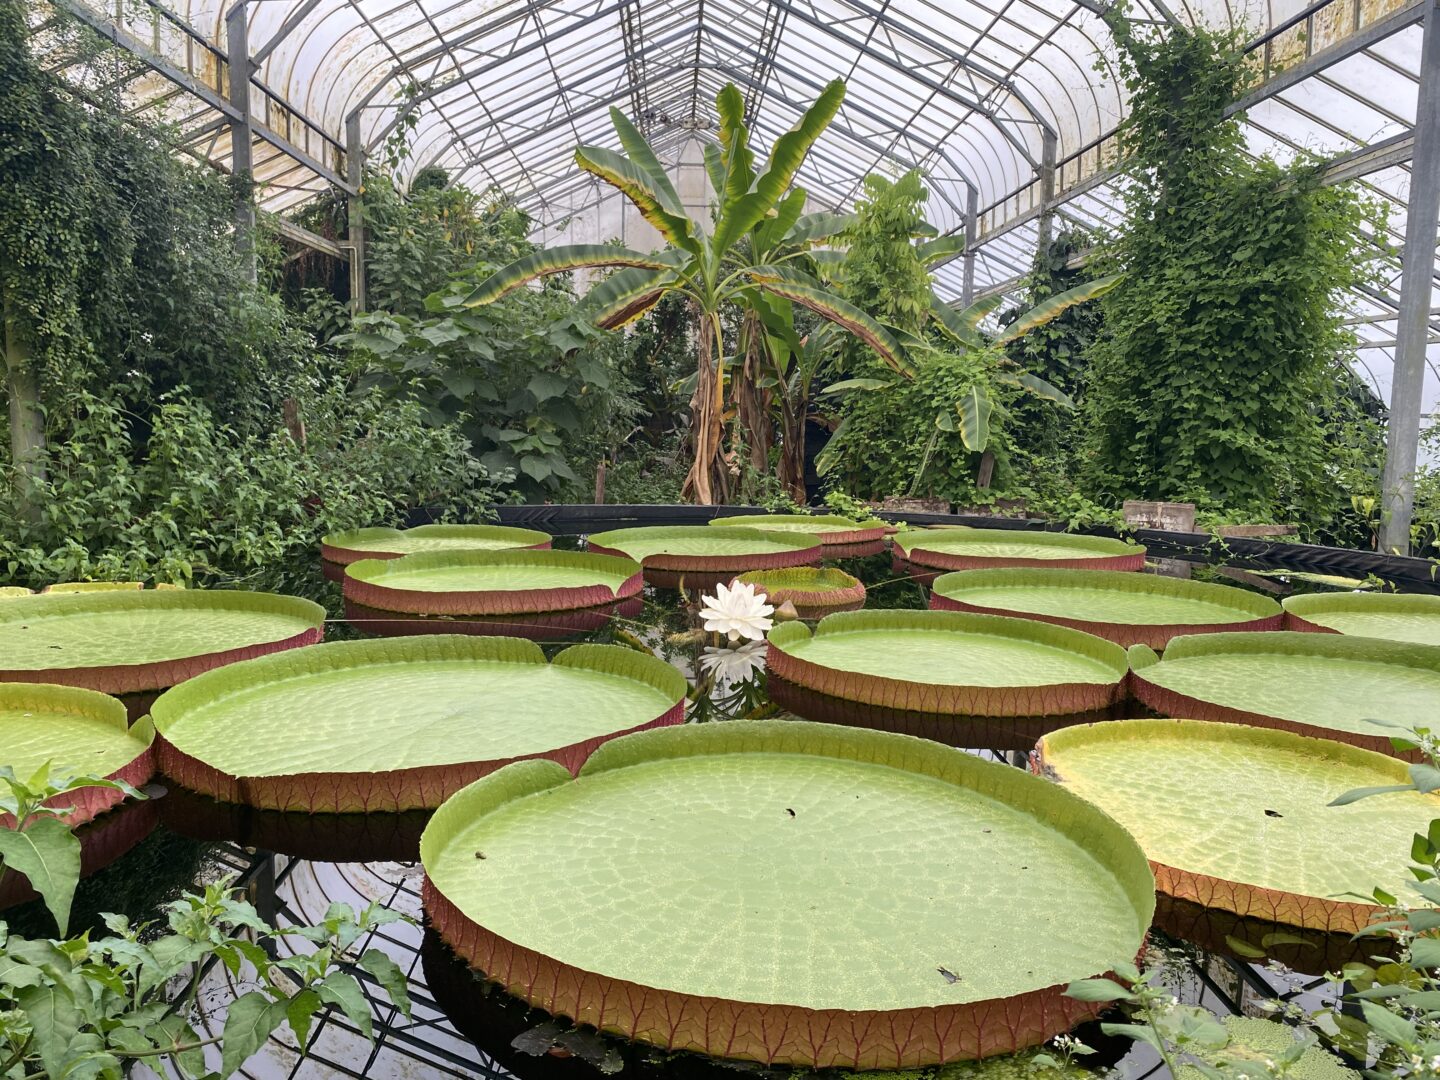 An image inside the Tropical House at Ventnor Botanic Garden, with tropical trees and plants in the background and giant waterlily pads in the pond in the foreground. A single Flower is in bloom with colours of white with hints of pink.